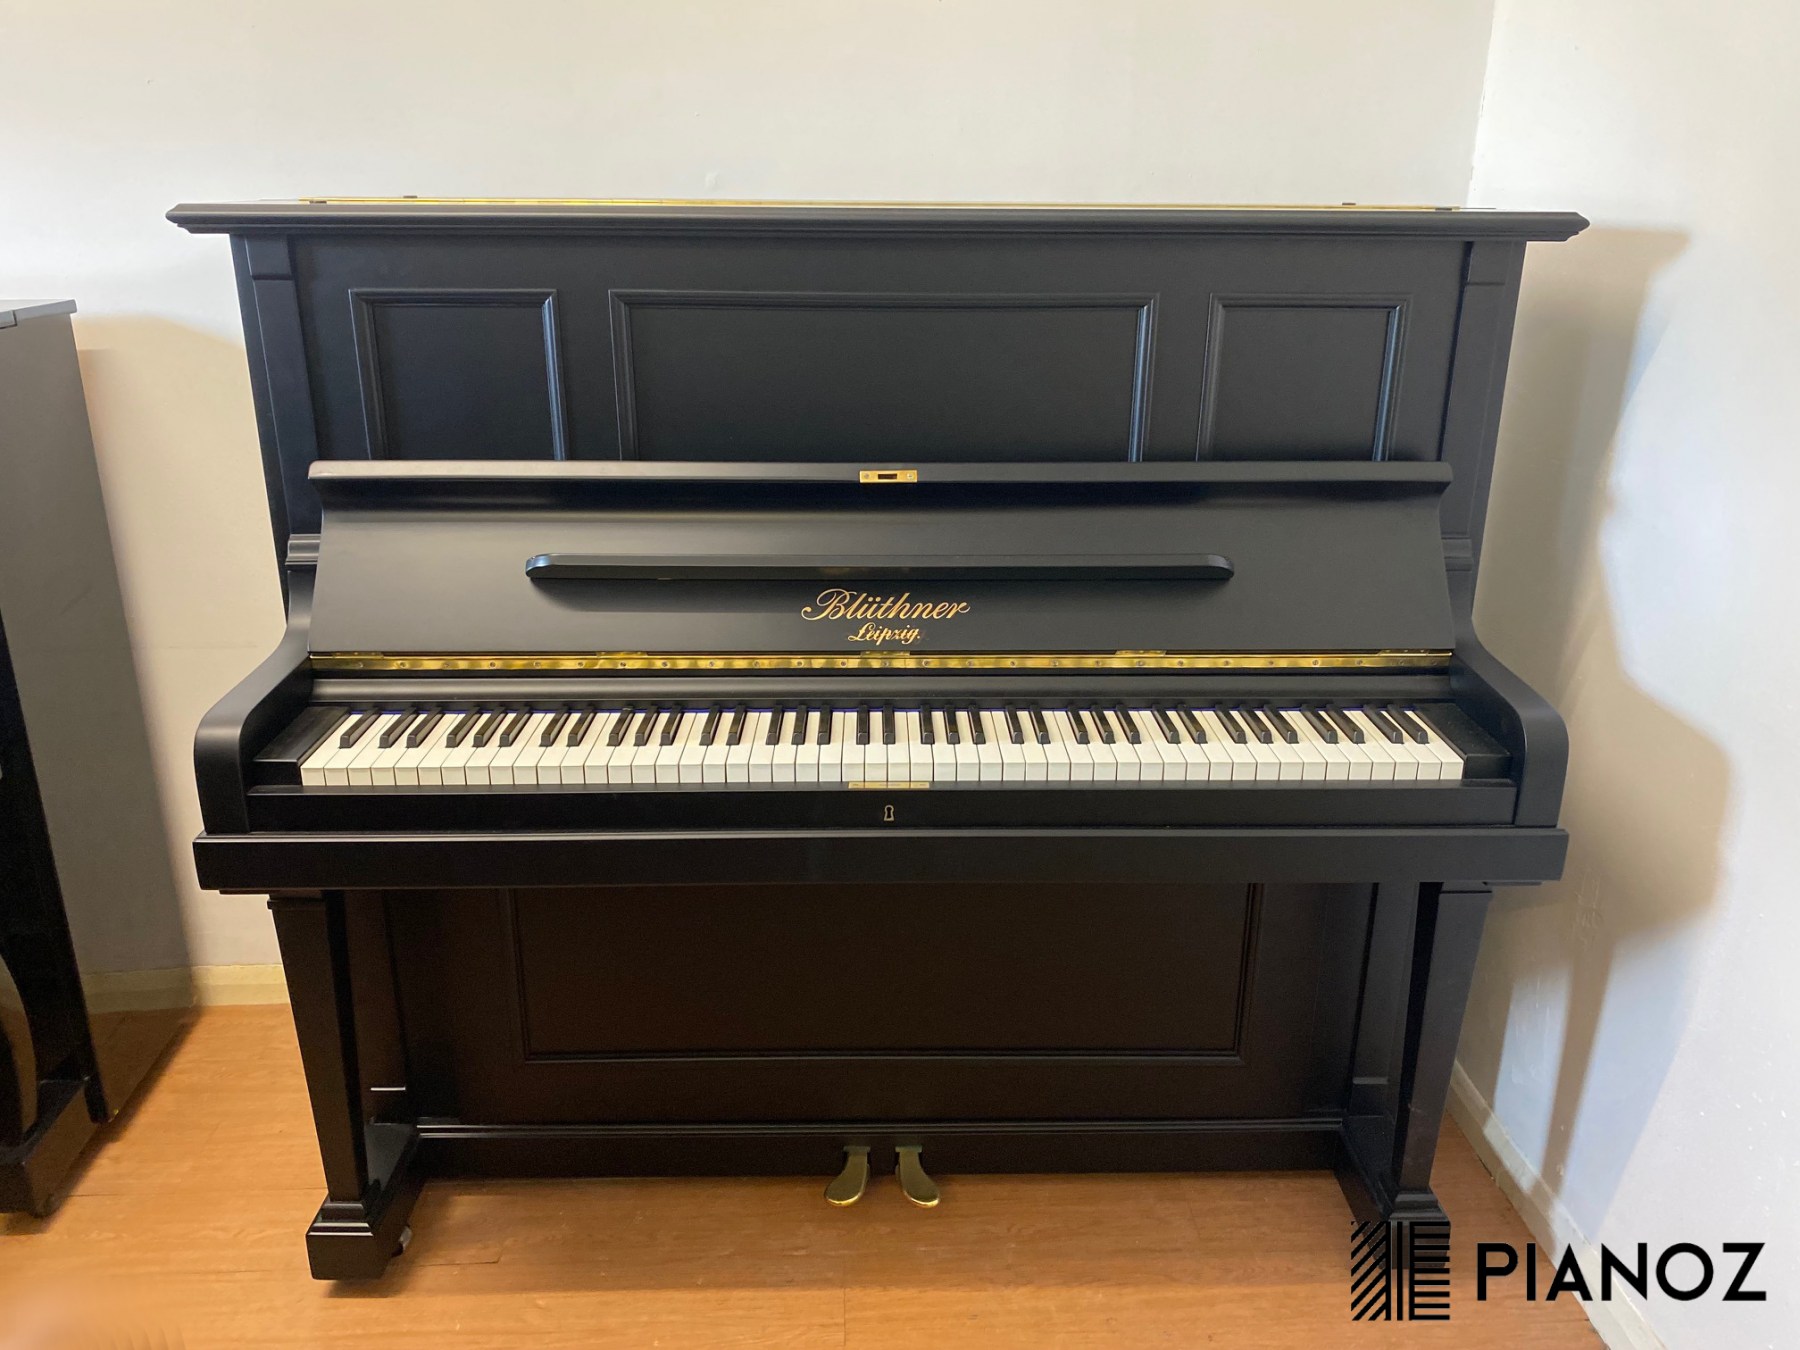 Bluthner Newly Restored Upright Piano piano for sale in UK